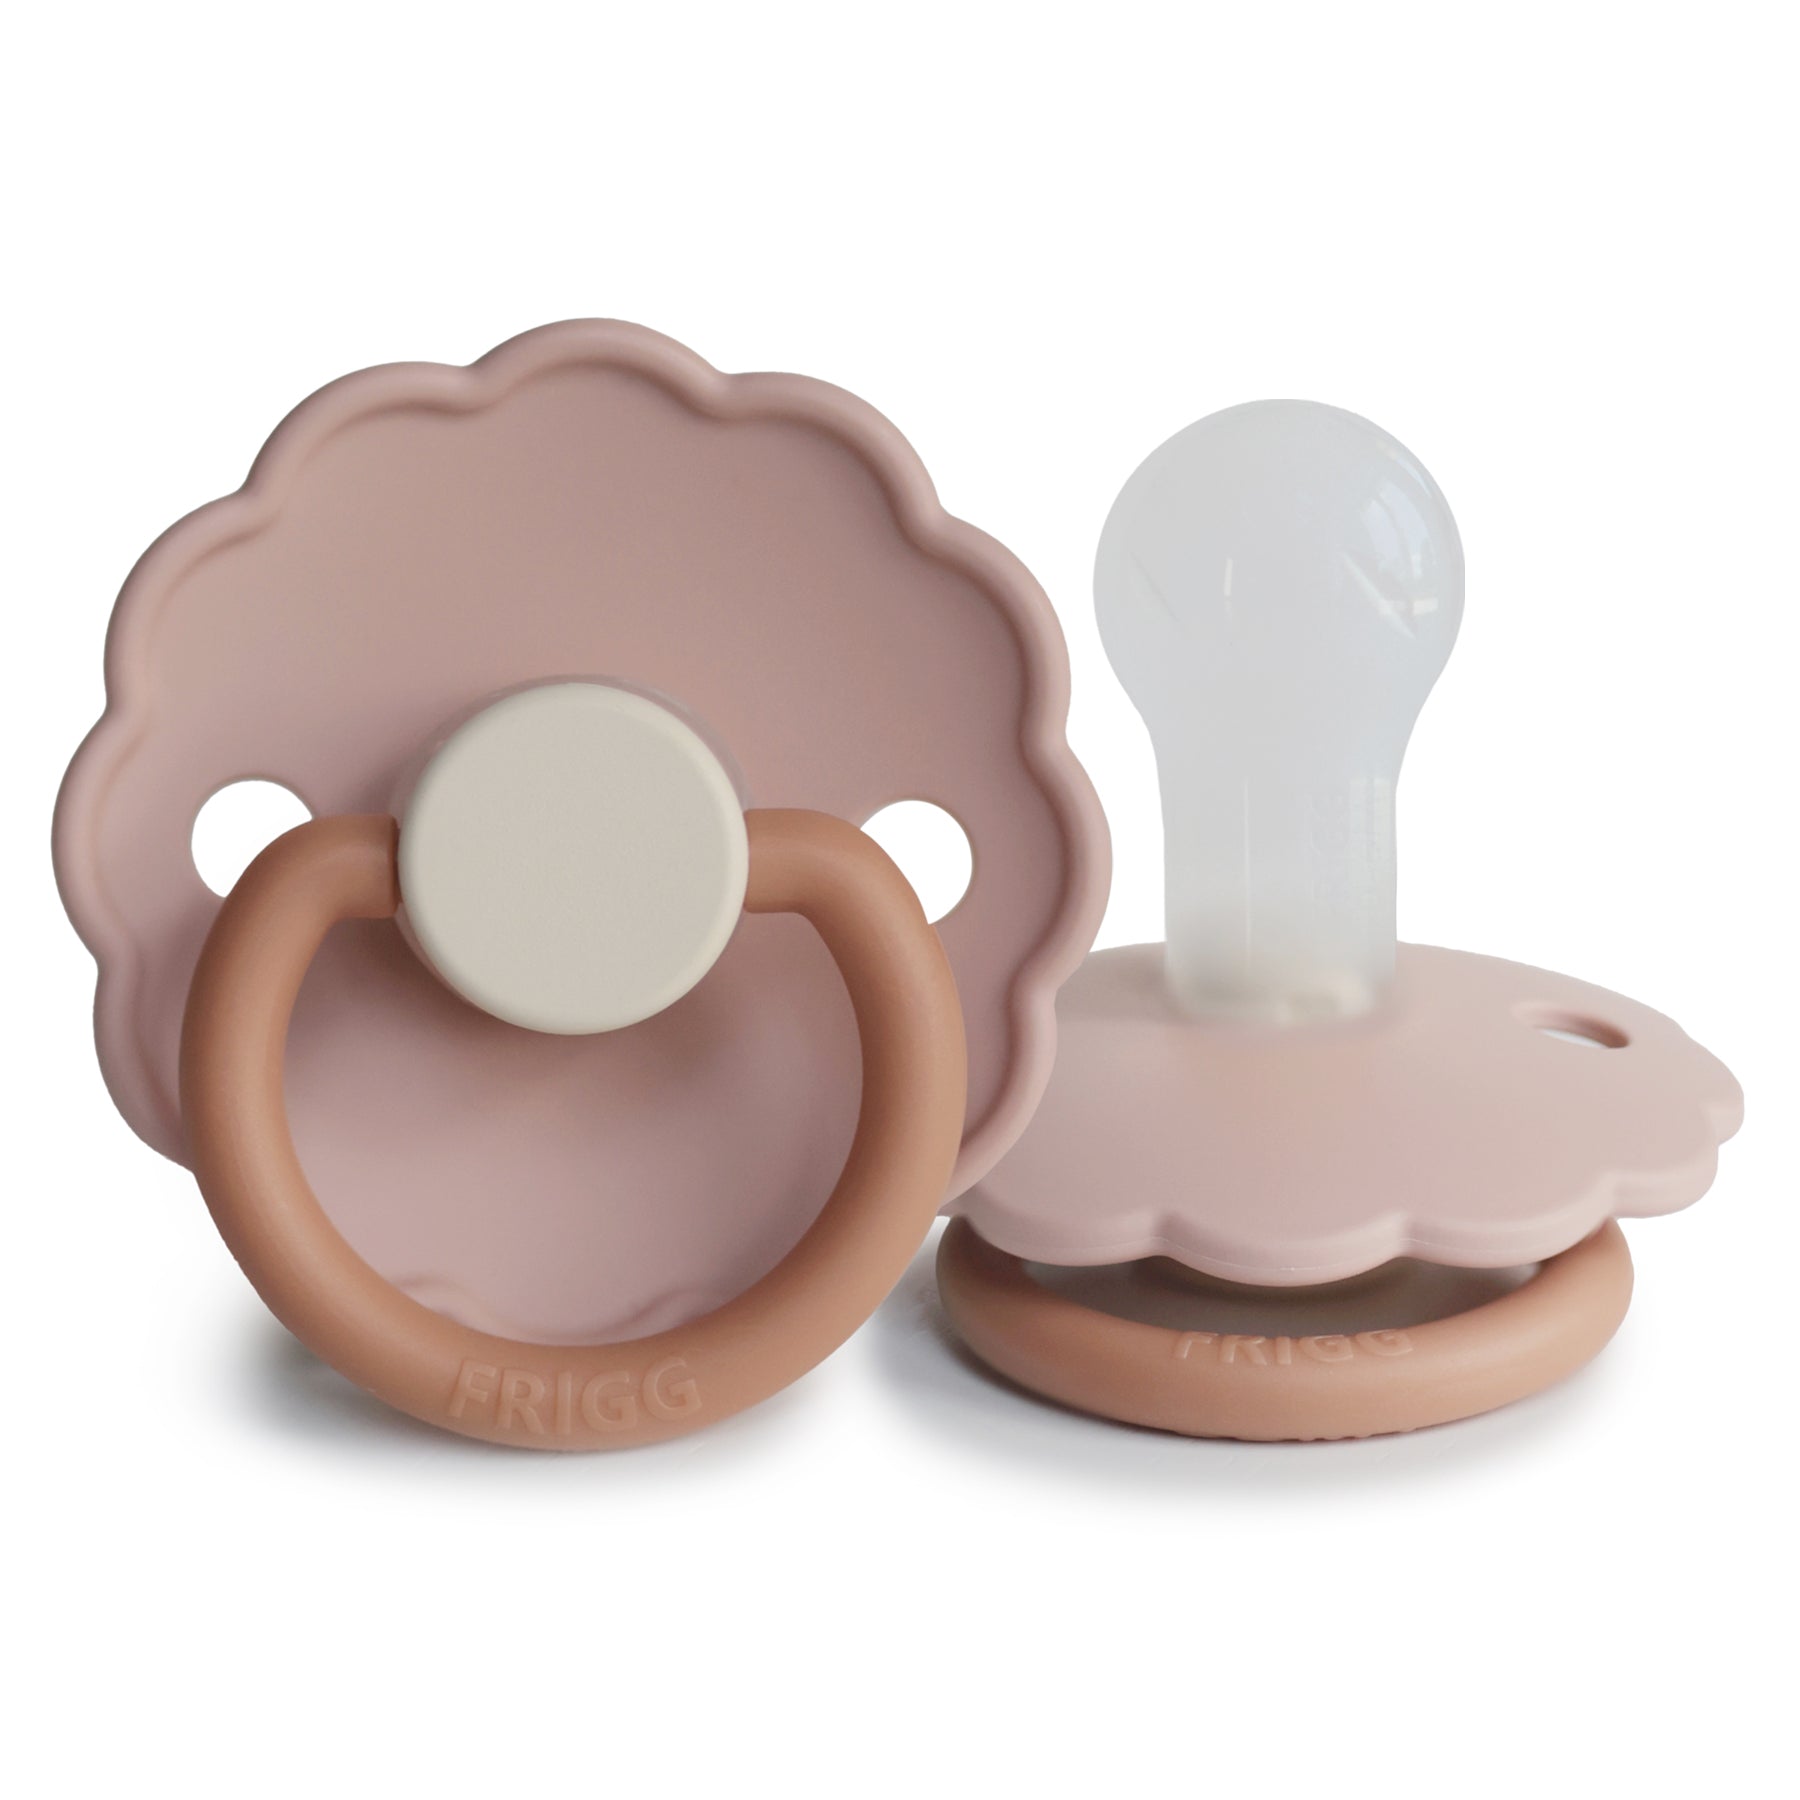 Daisy Silicone Pacifier Biscuit Colorblock